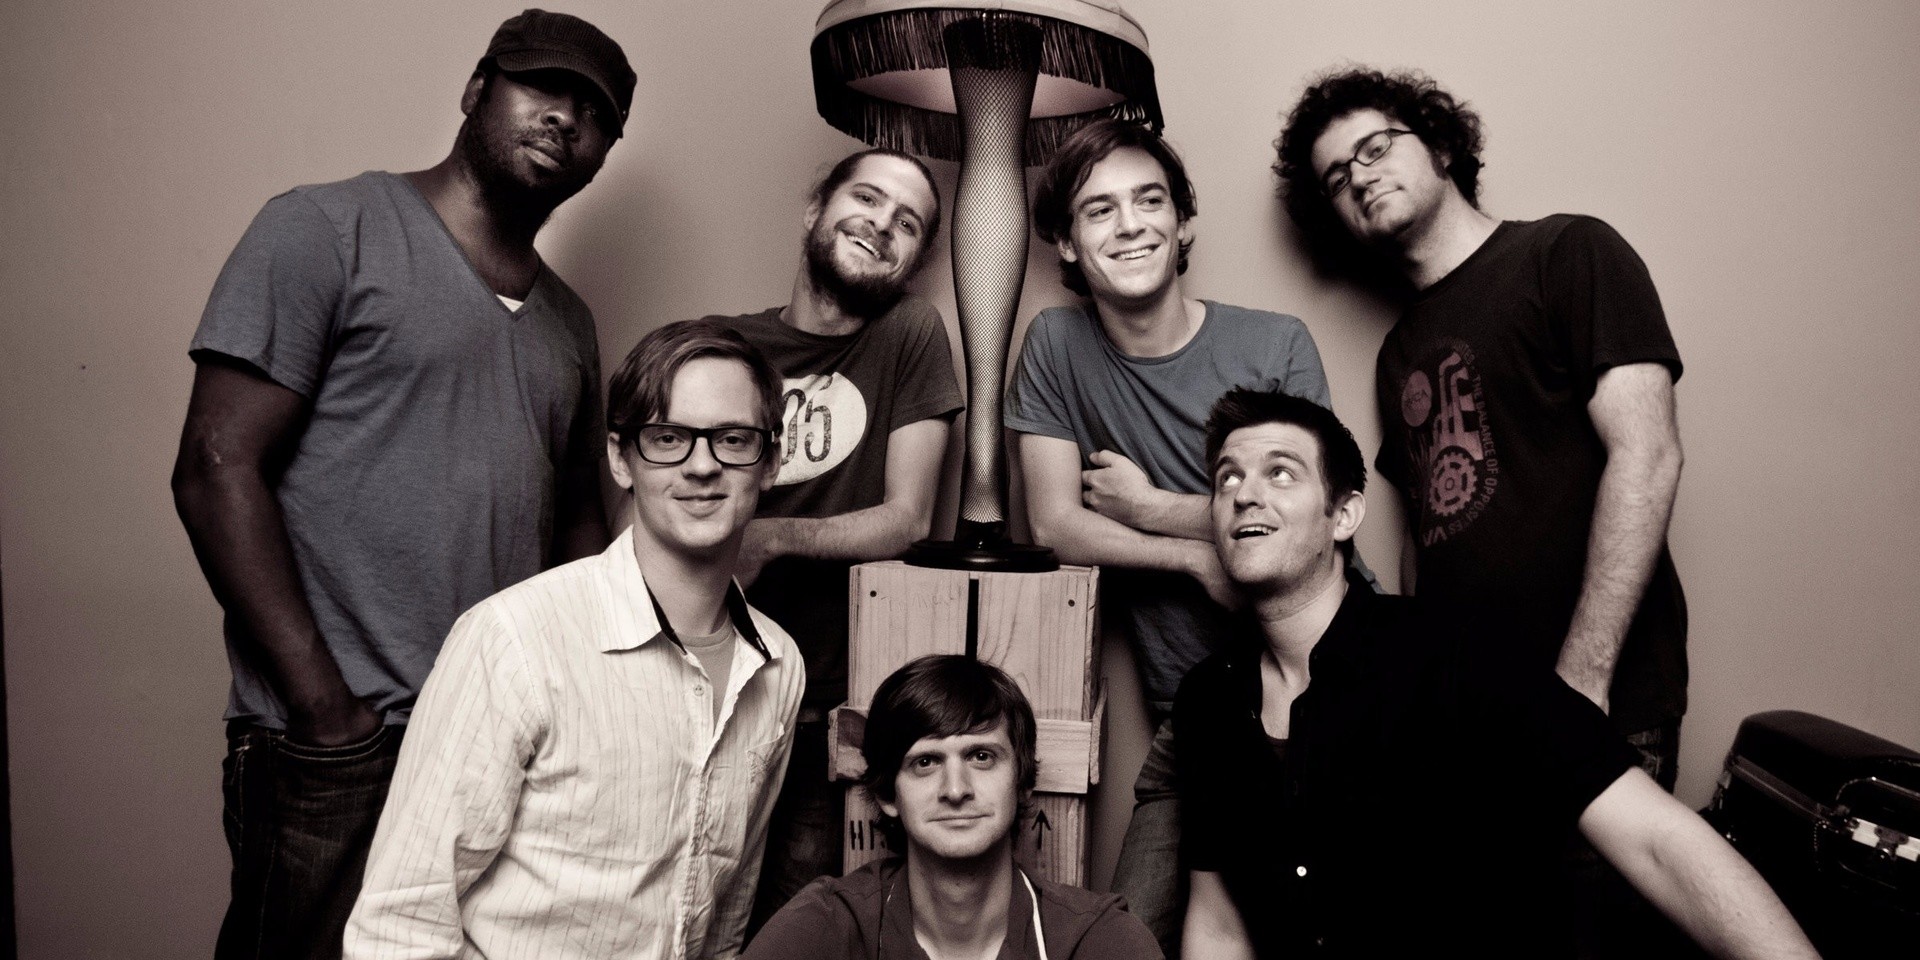 The Snarky Puppy live experience, as described by Singaporean musicians